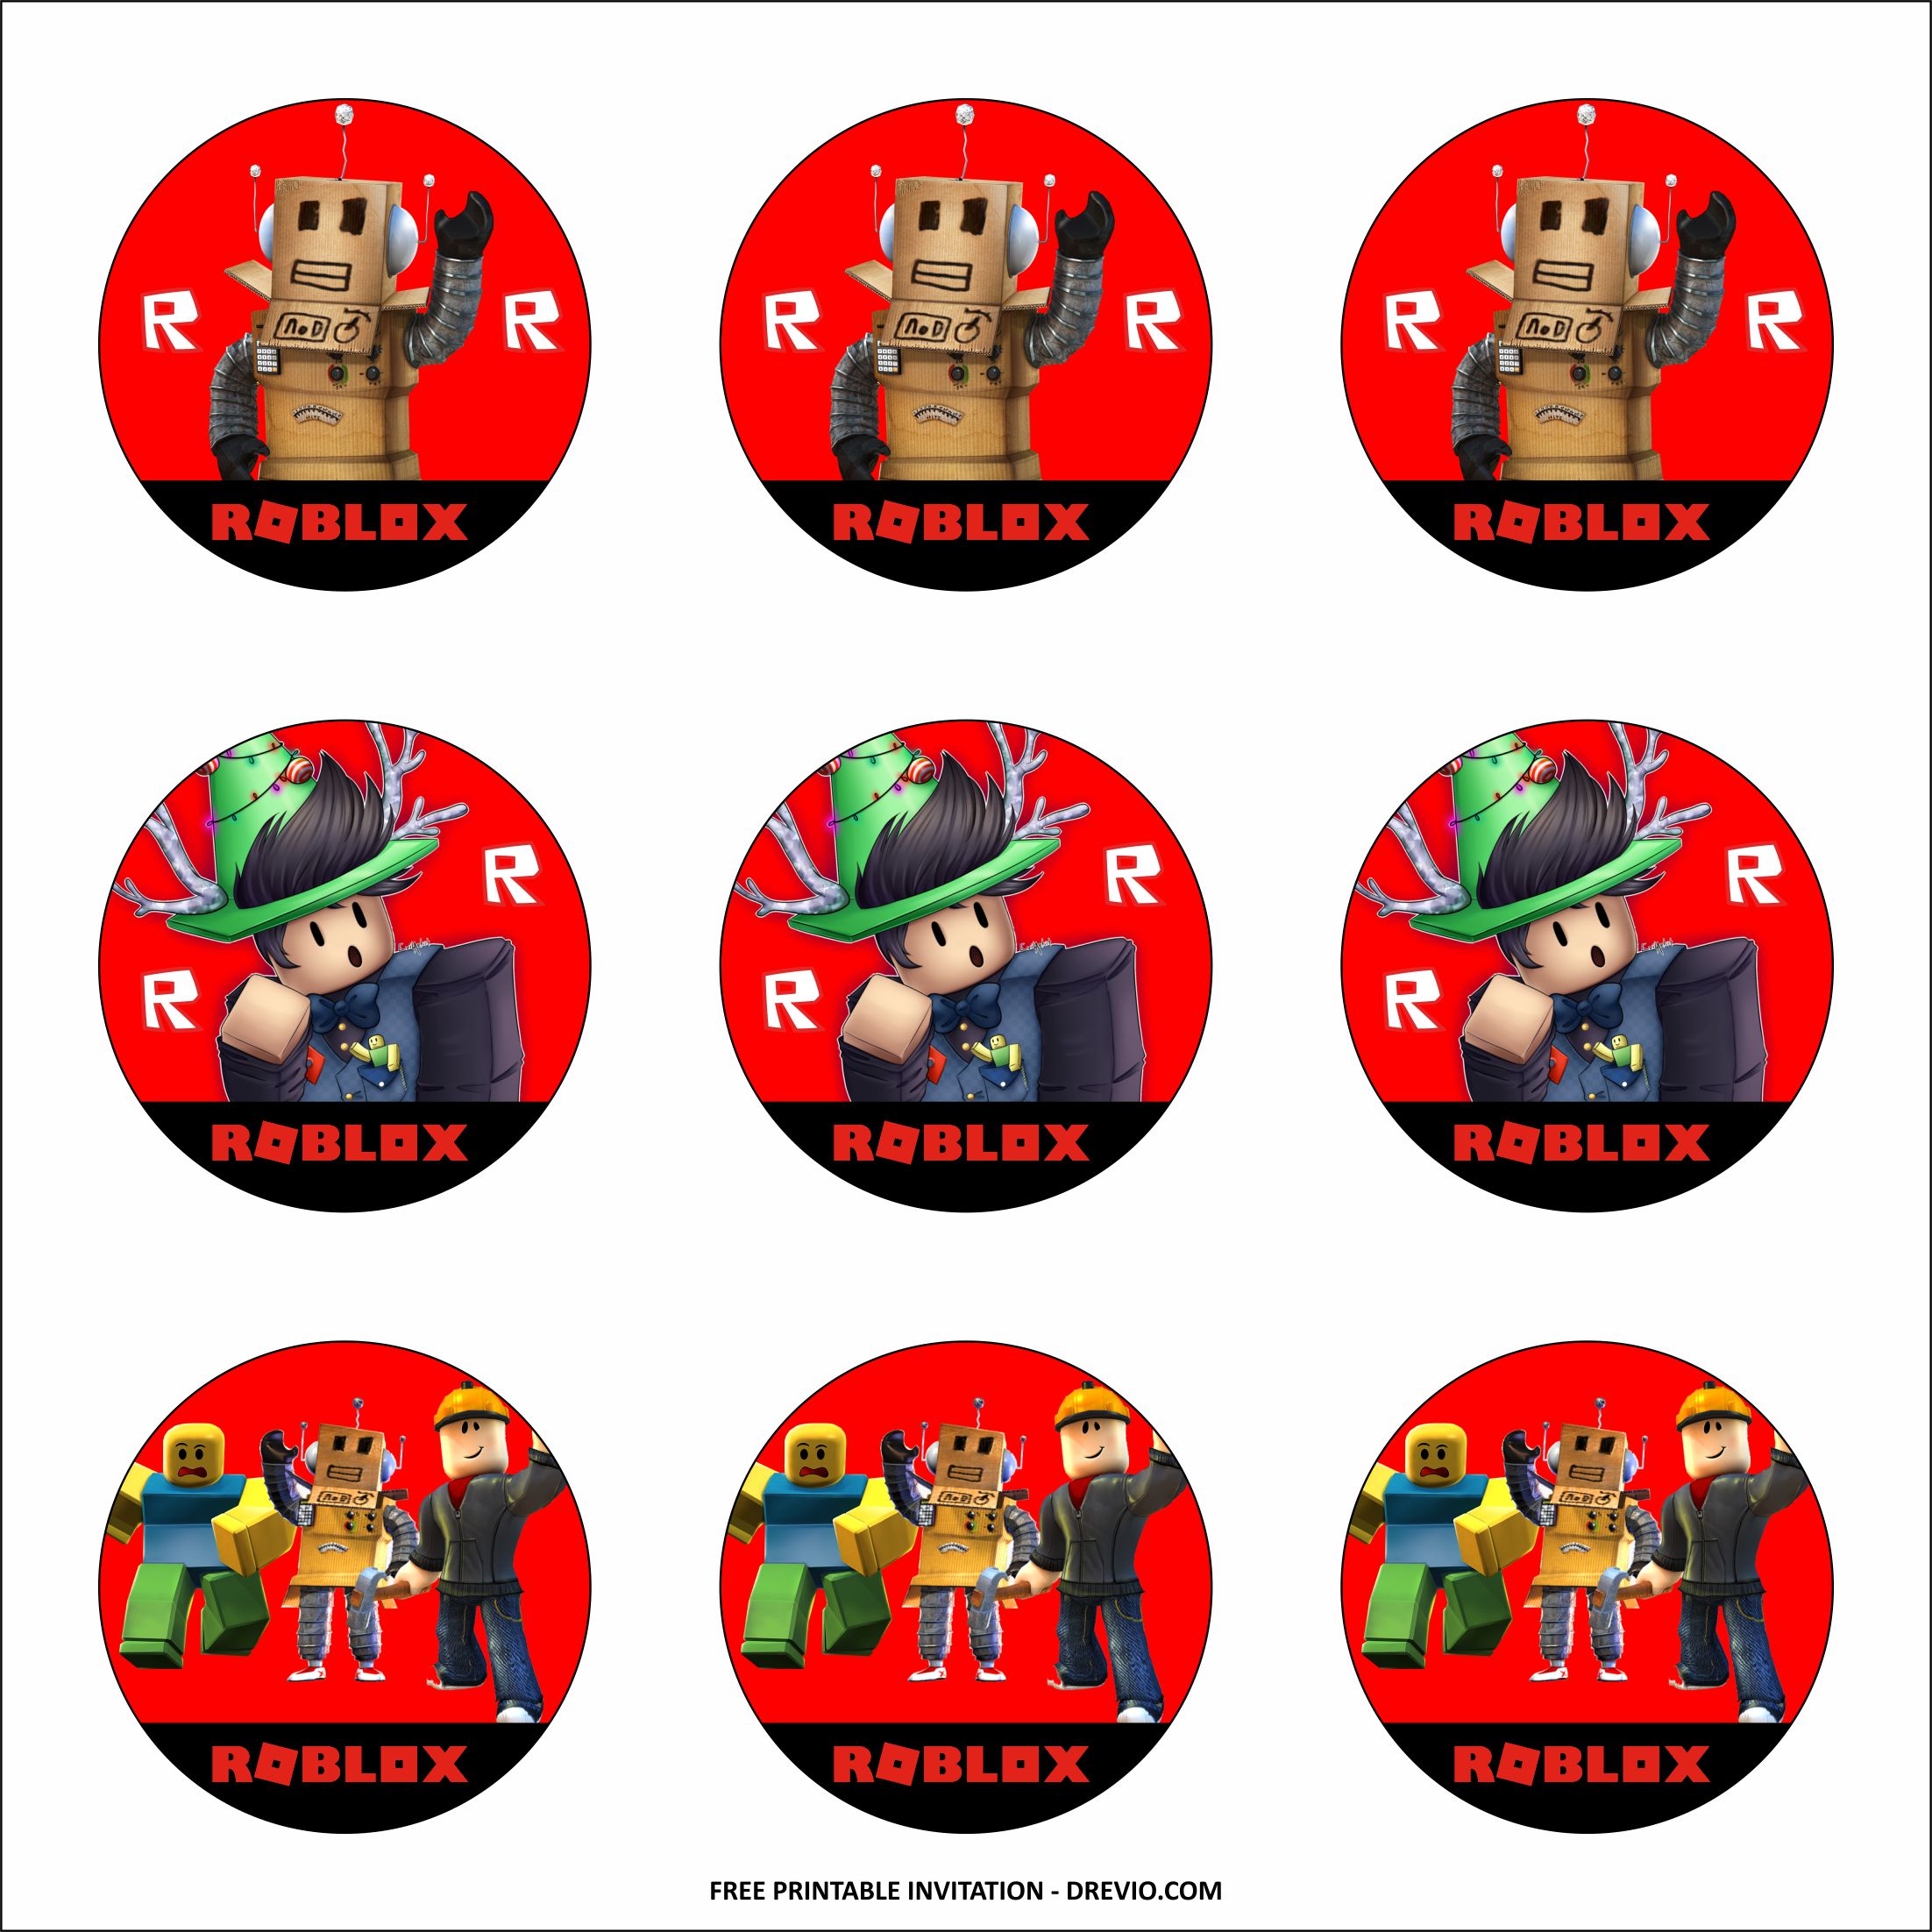 Roblox • Topper • Pennants • Stickers • Cupcake Toppers • FREE! 